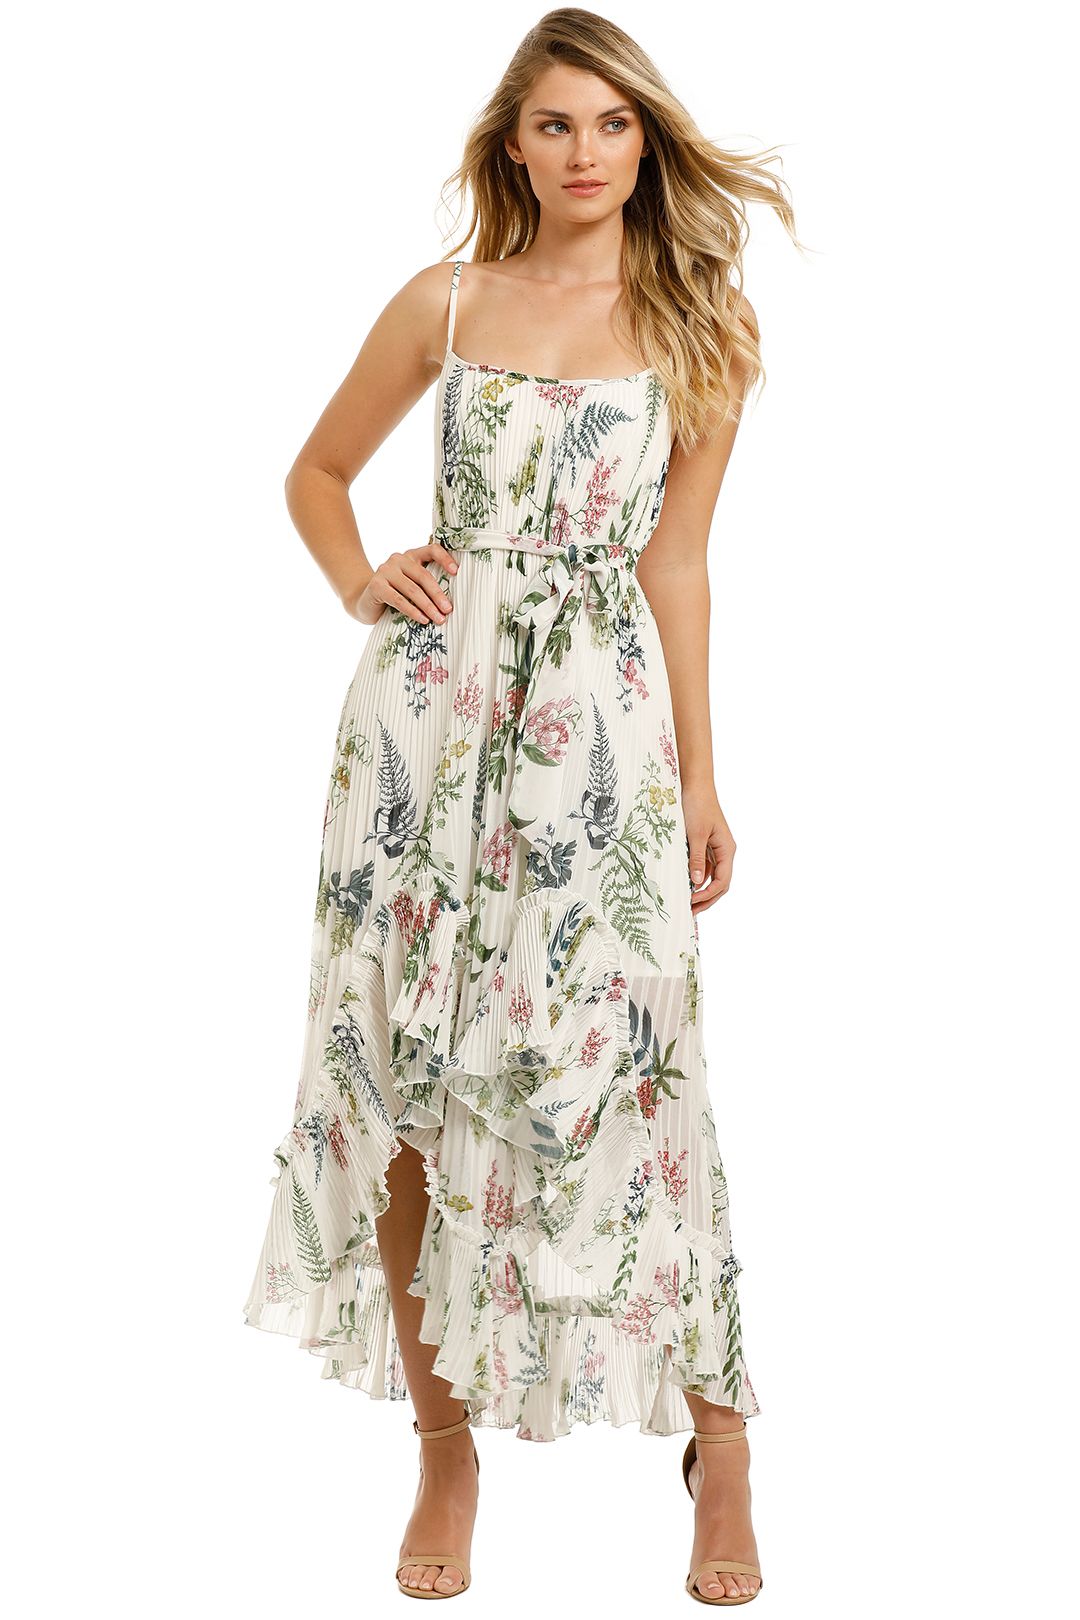 We-Are-Kindred-Frankie-Pleated-Dress-Ecru-Delphinum-Front